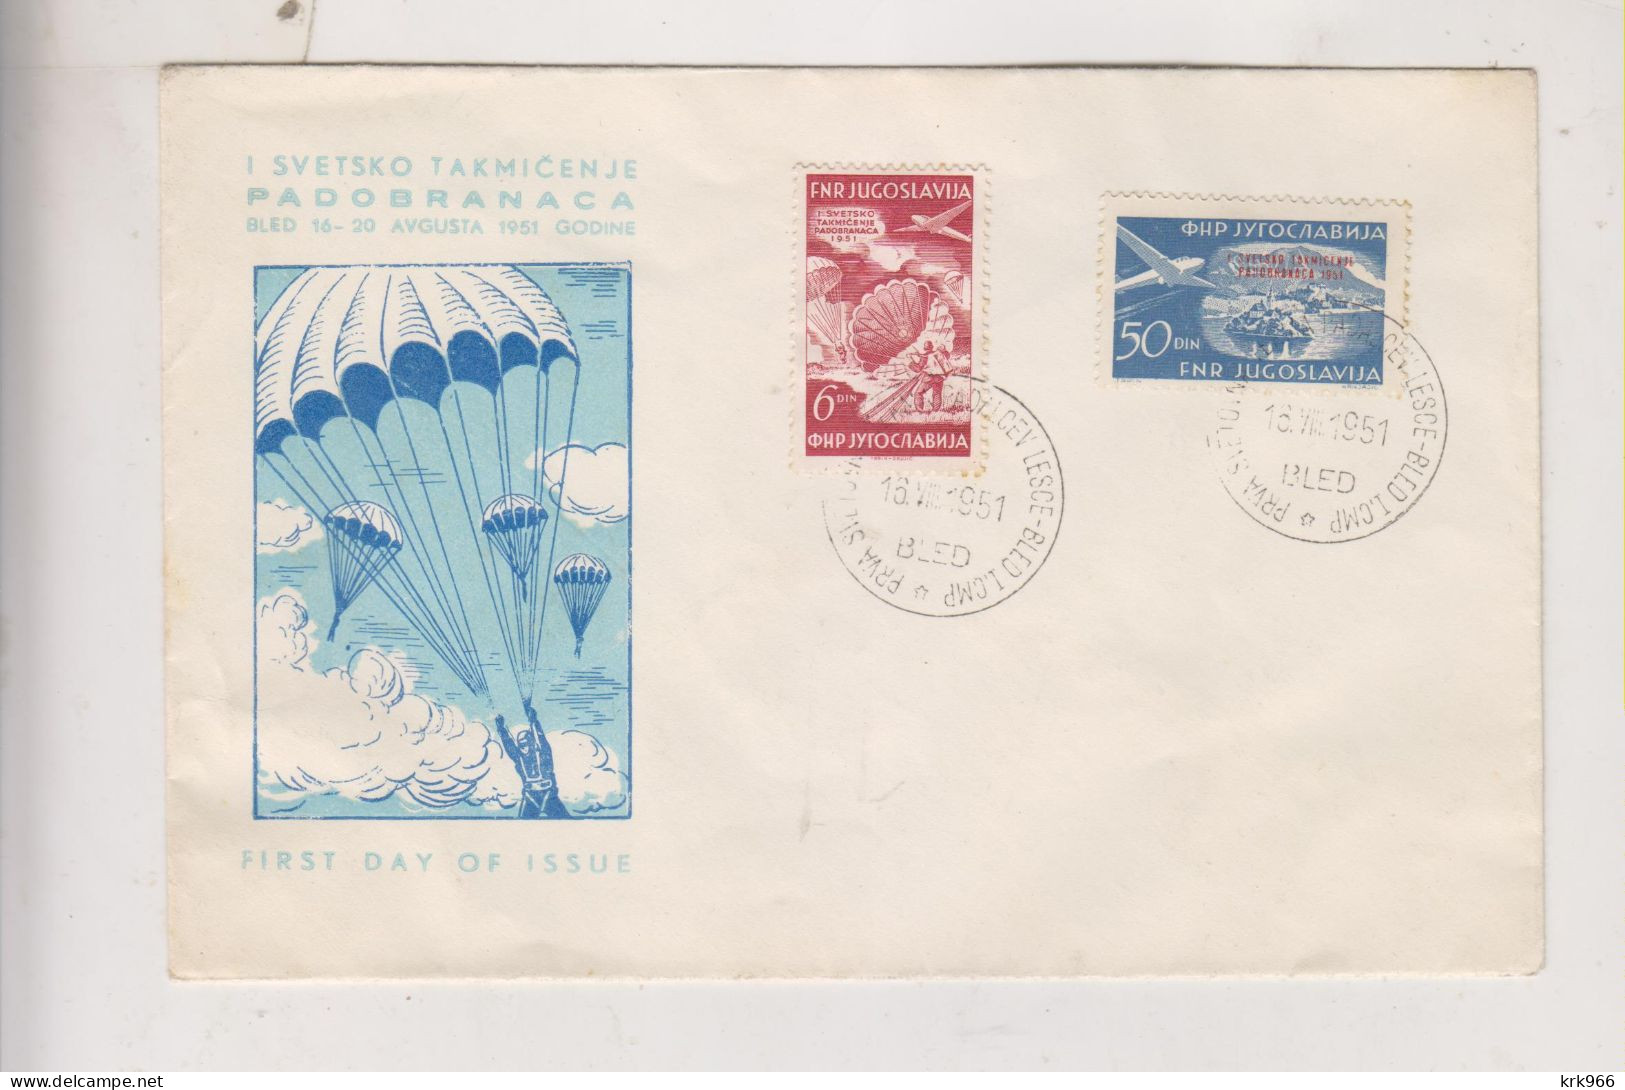 YUGOSLAVIA,1951 BLED PARACHUTING FDC Cover - Covers & Documents